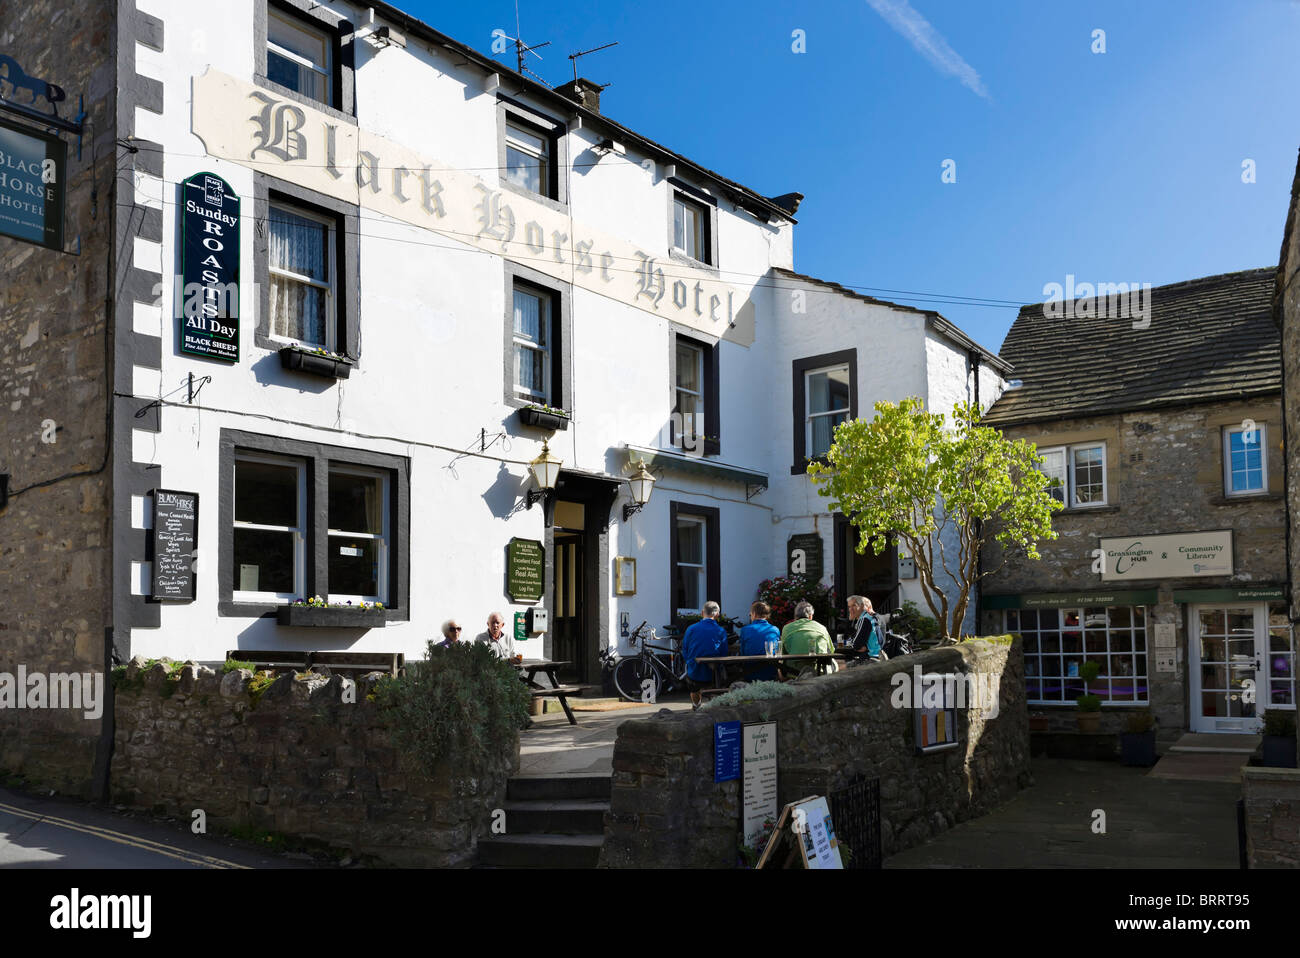 The Black Horse hotel and pub in the centre of Grassington, Upper Wharfedale, Yorkshire Dales, North Yorkshire, England, UK Stock Photo